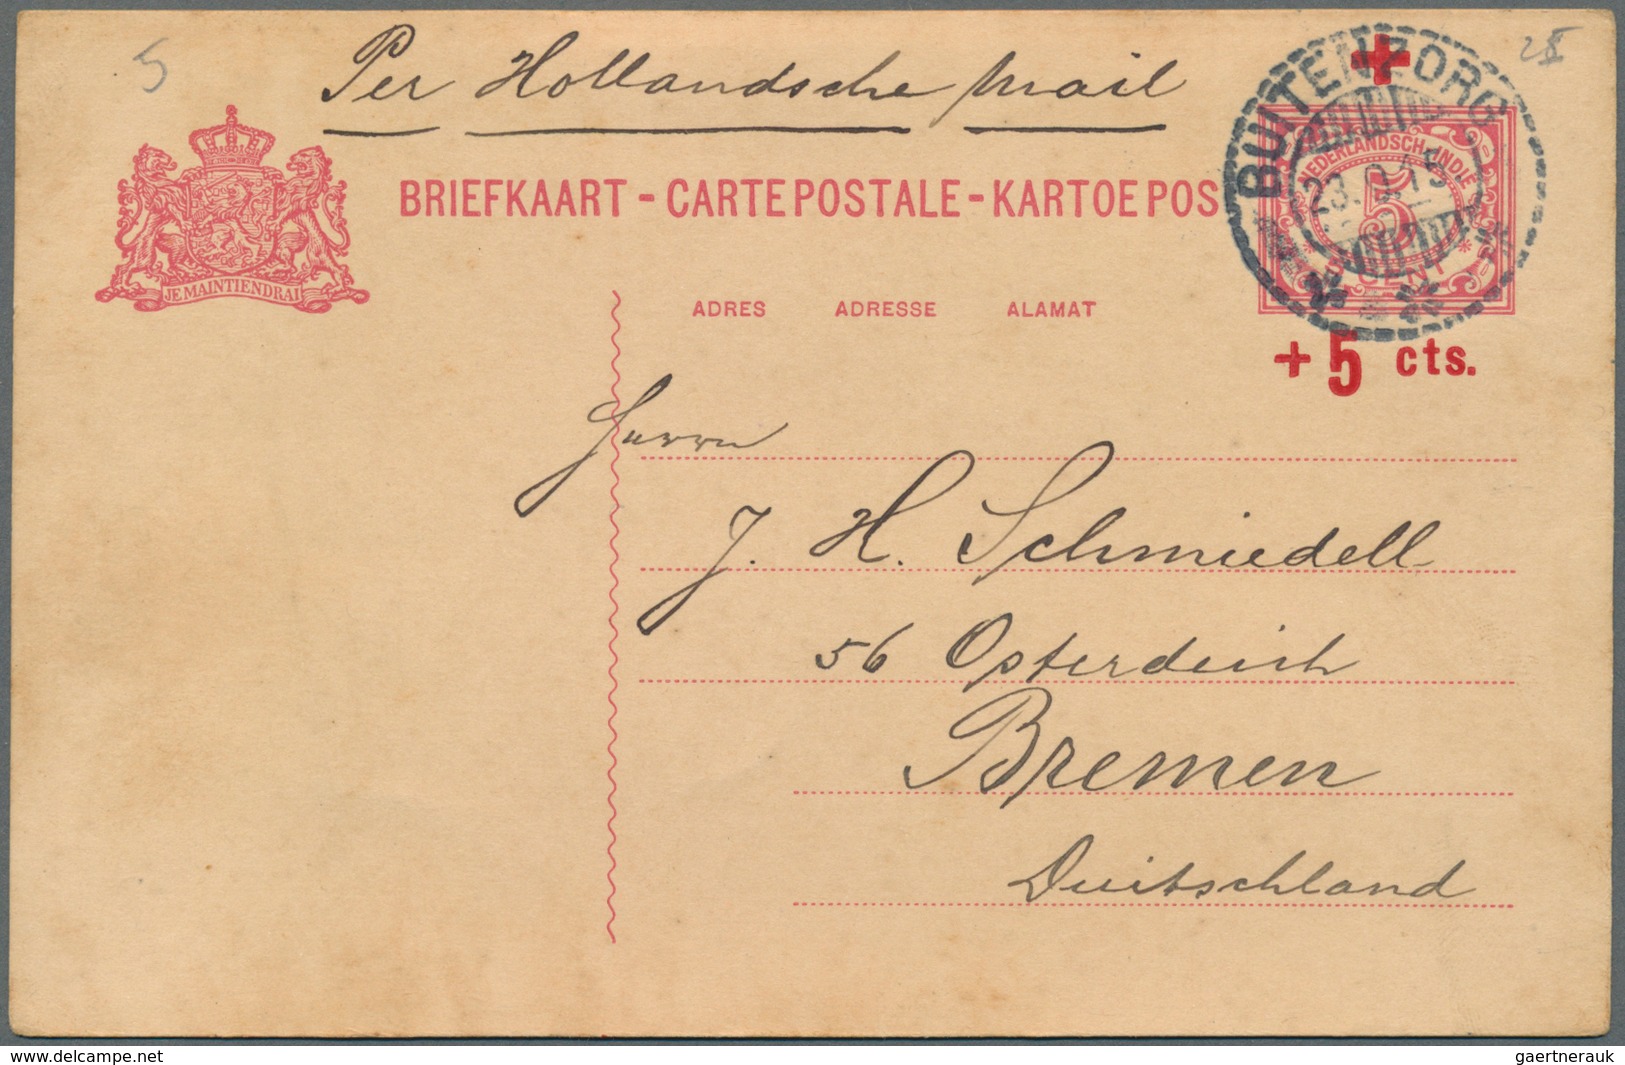 Niederländisch-Indien: 1888/1932, used stationery envelopes (10, inc. uprates for airmail or foreign